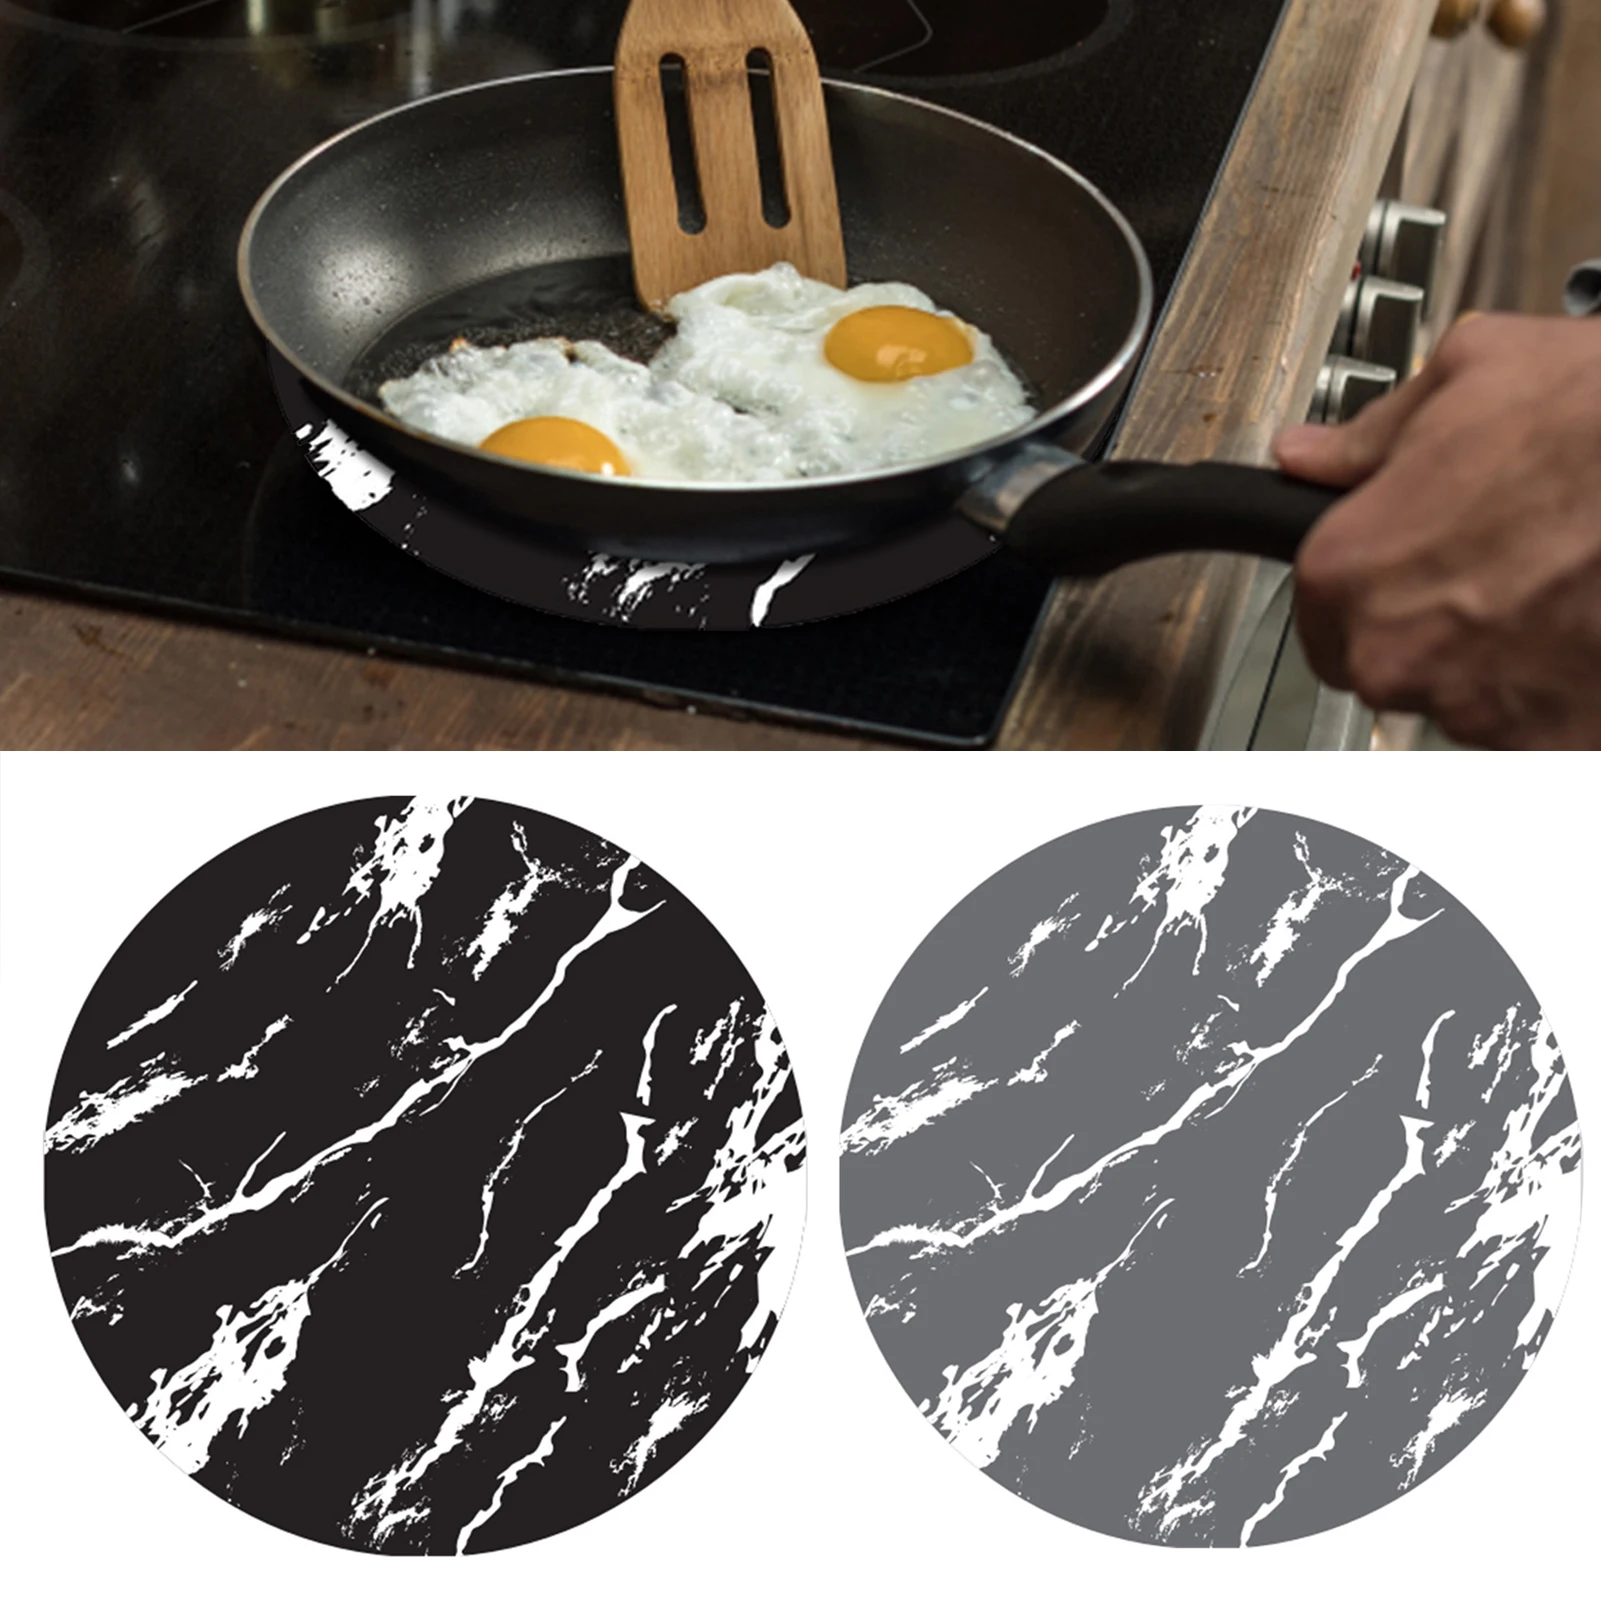 New Induction Cooktop Mat Silicone Induction Cooker Covers Heat-resistant  Induction Cooktop Protector Mat 30.8×20.5Inch Mat - AliExpress